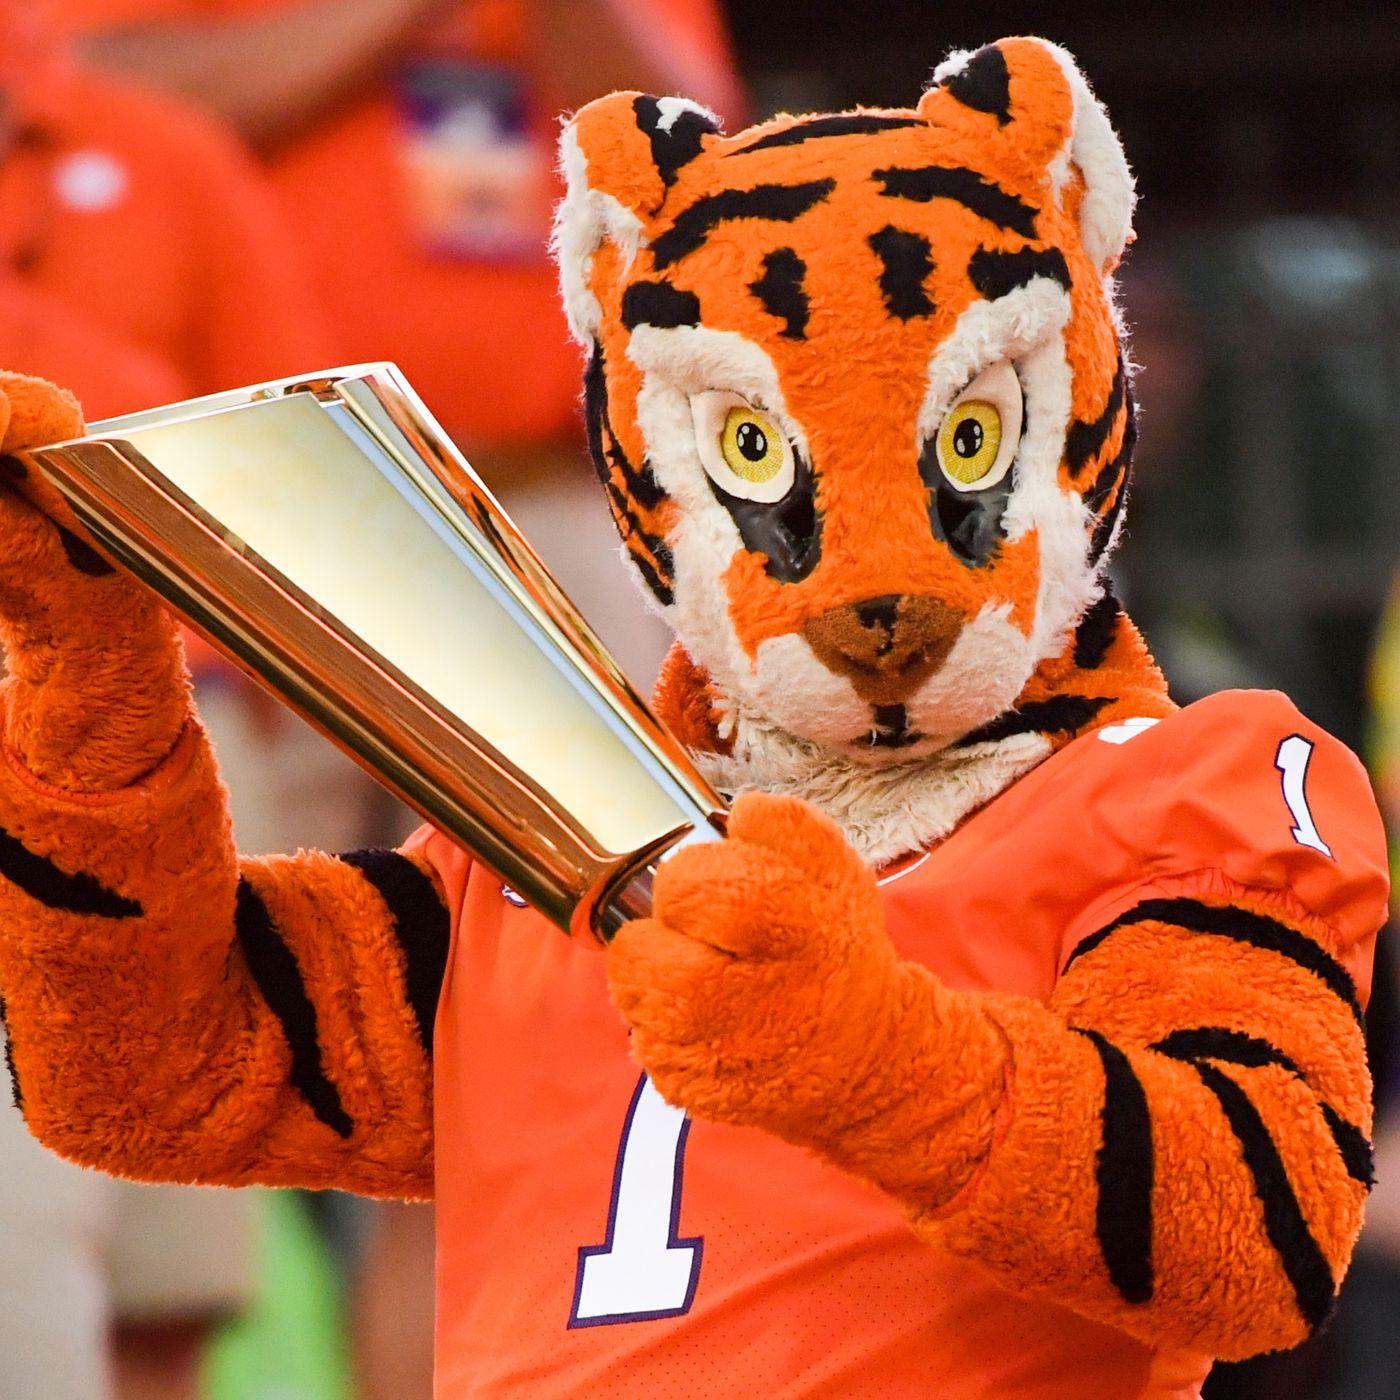 A Total list of Clemson Tigers football seasons : The Clemson Tigers is one of the popular American football team at Clemson University